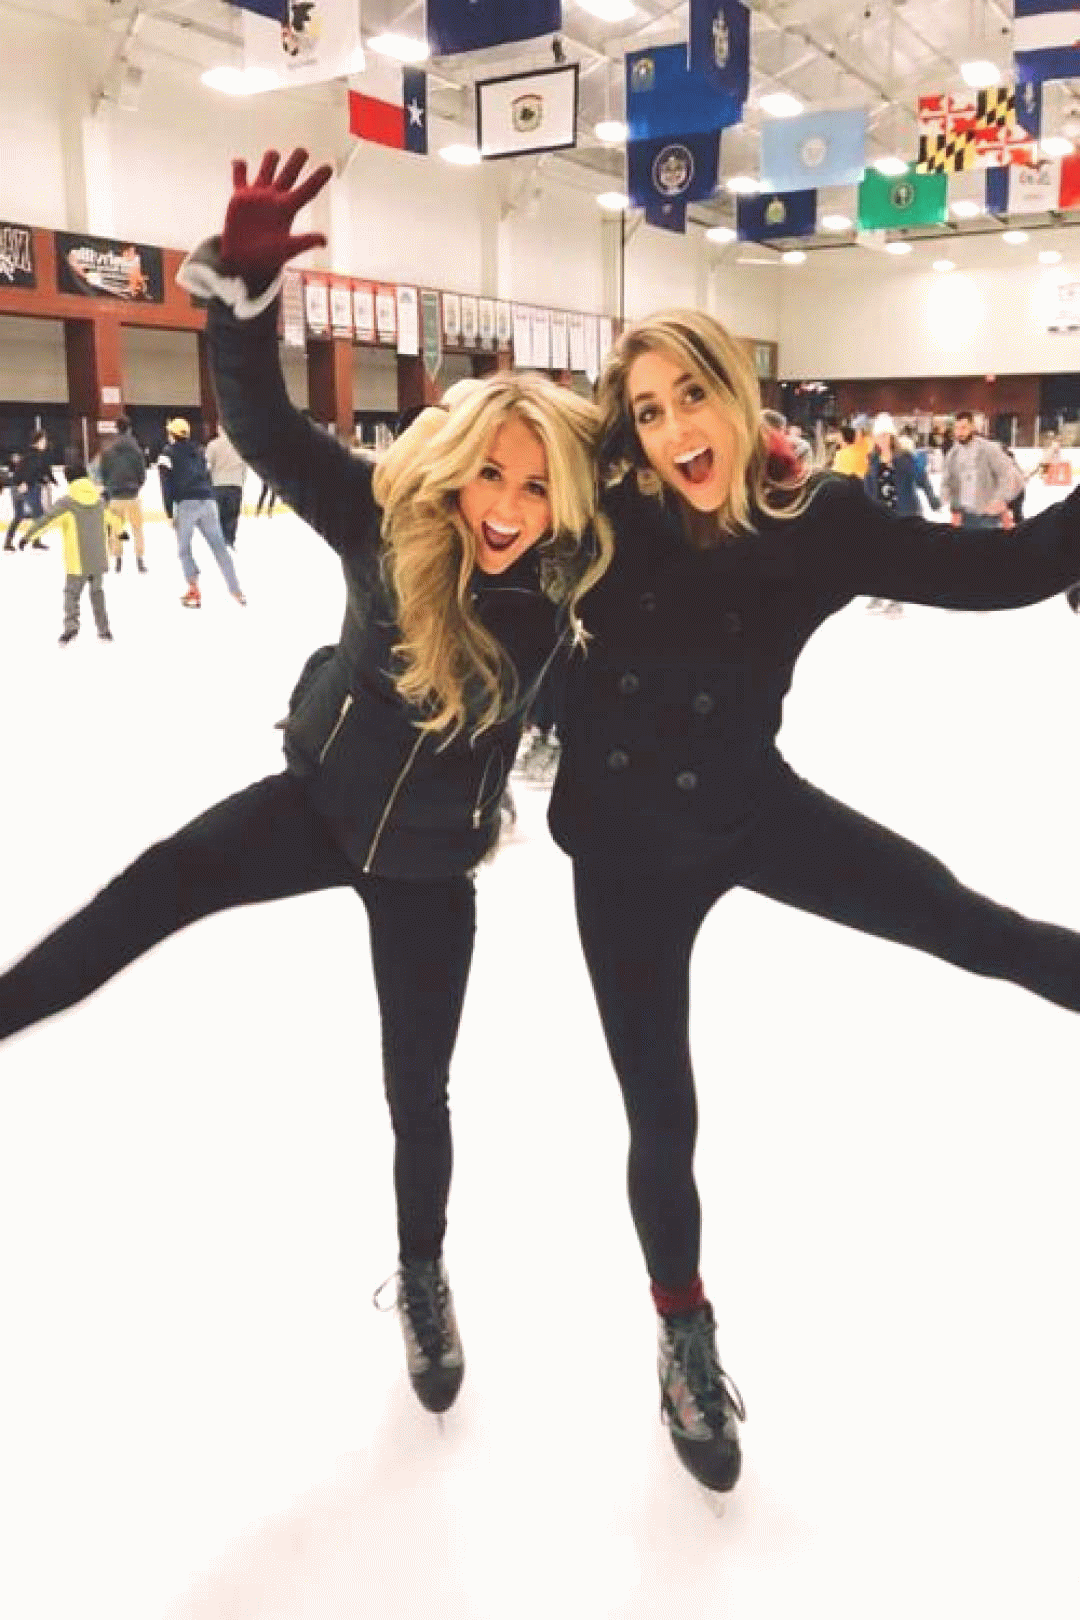 bff pictures squad ice skating cute instagram pair small